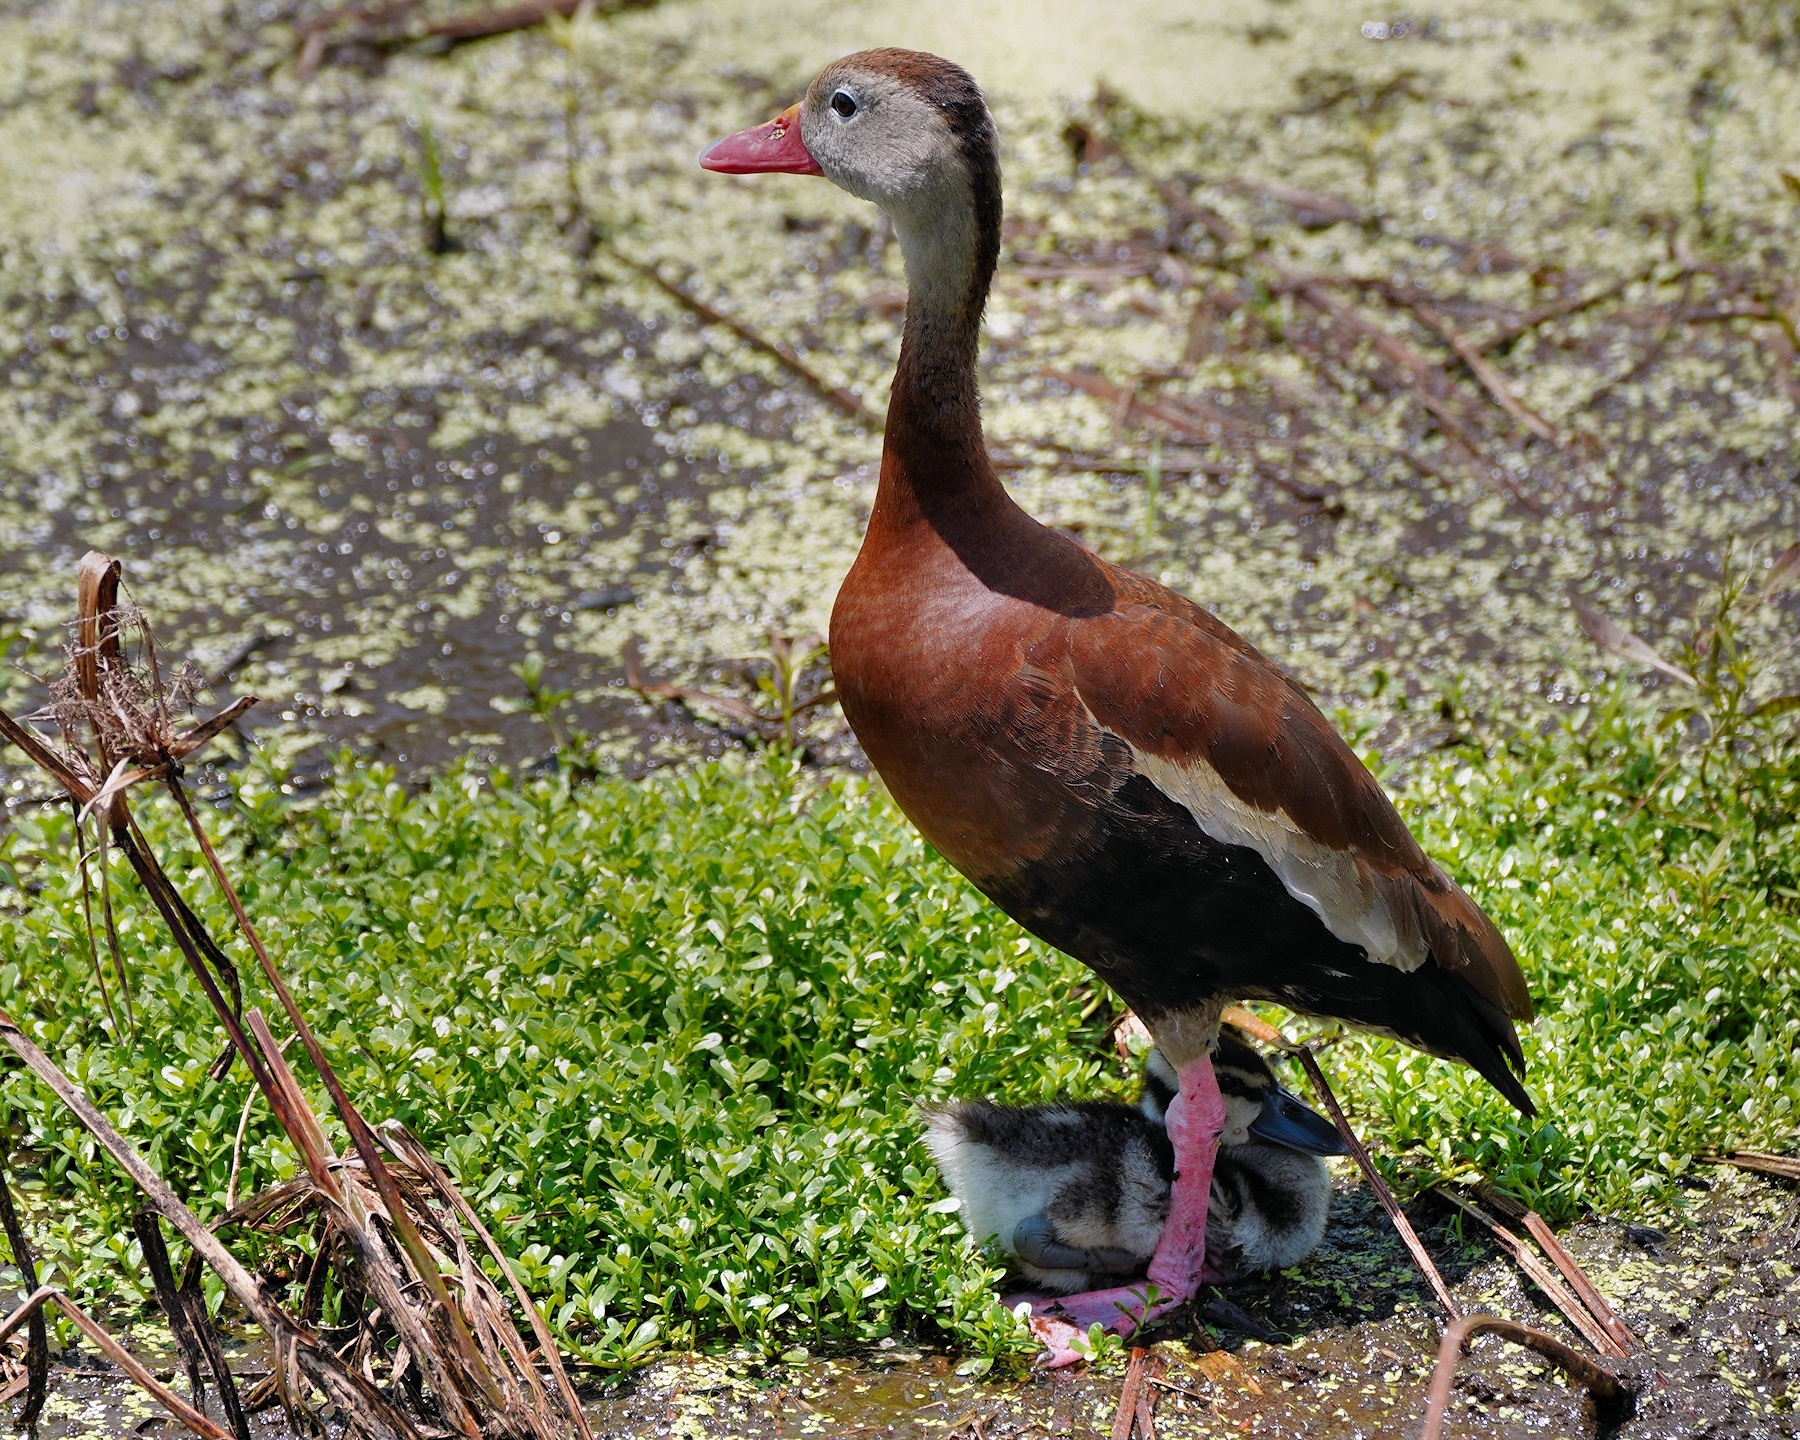 Black-bellied whistling duck with duckling